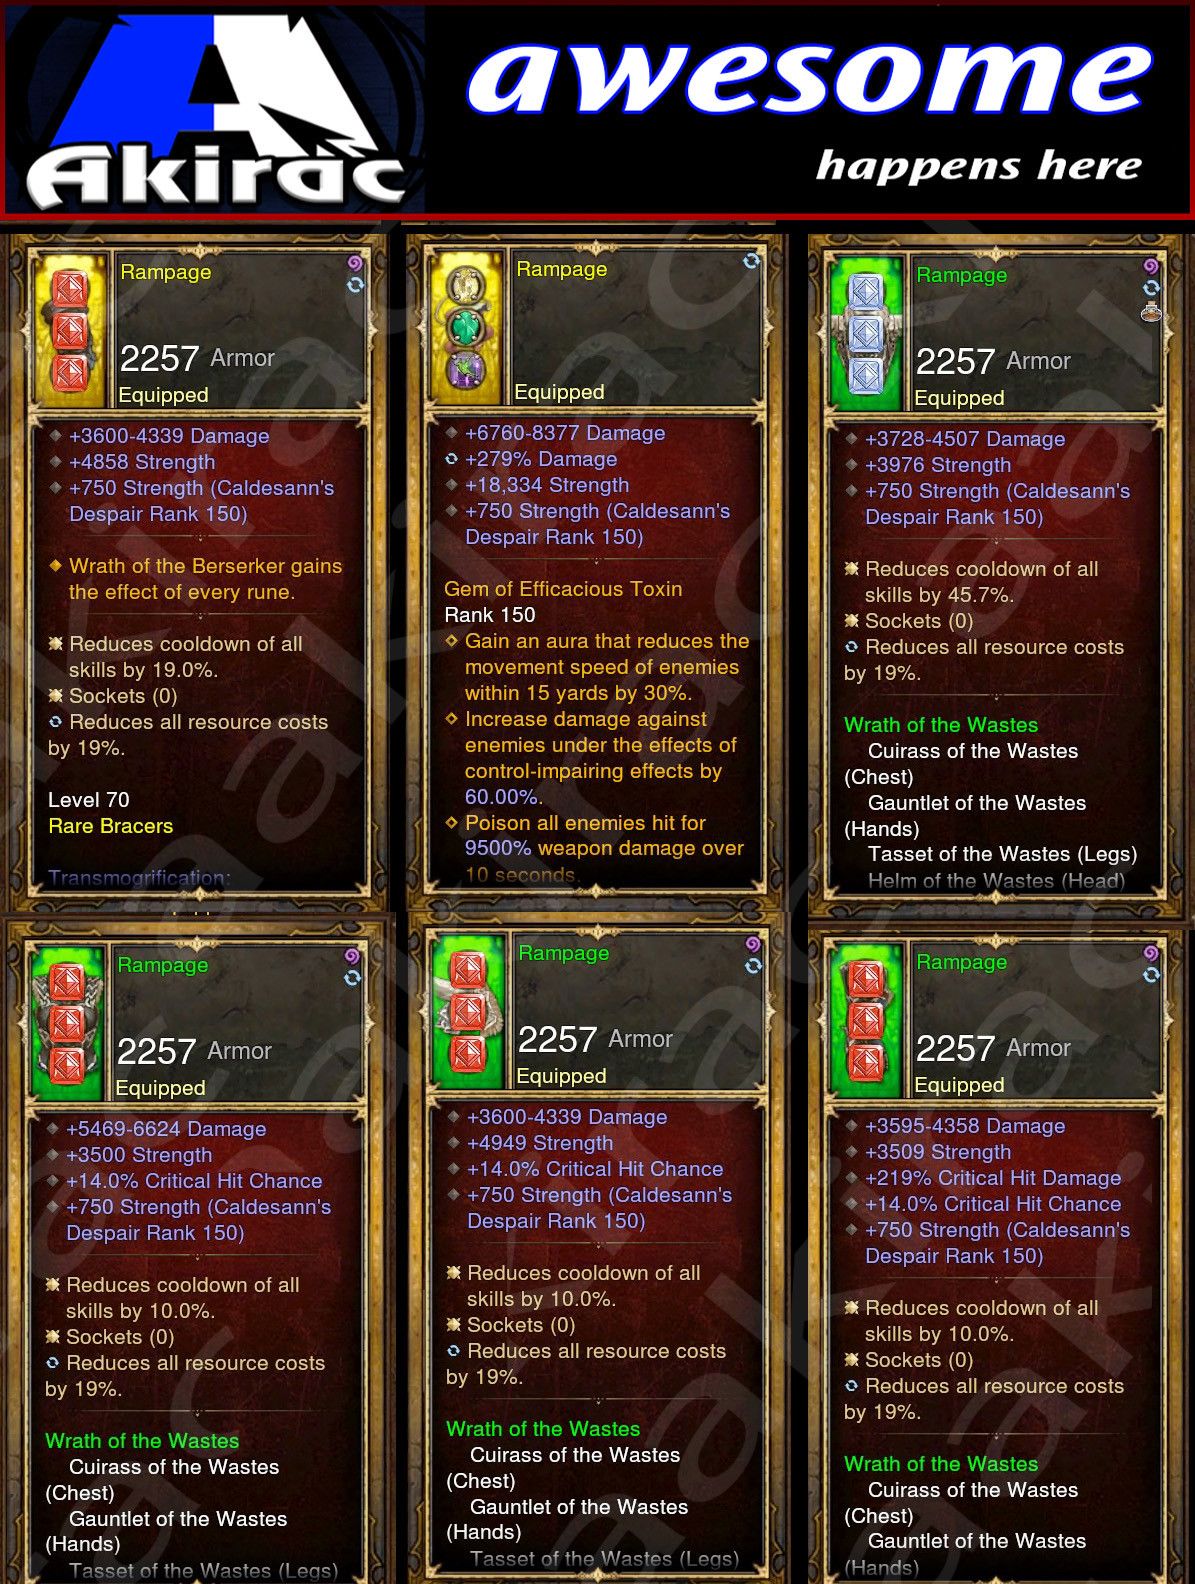 Diablo 3 Immortal v1 Waste Barbarian Modded Set for Rift 150 Rampage Diablo 3 Mods ROS Seasonal and Non Seasonal Save Mod - Modded Items and Gear - Hacks - Cheats - Trainers for Playstation 4 - Playstation 5 - Nintendo Switch - Xbox One